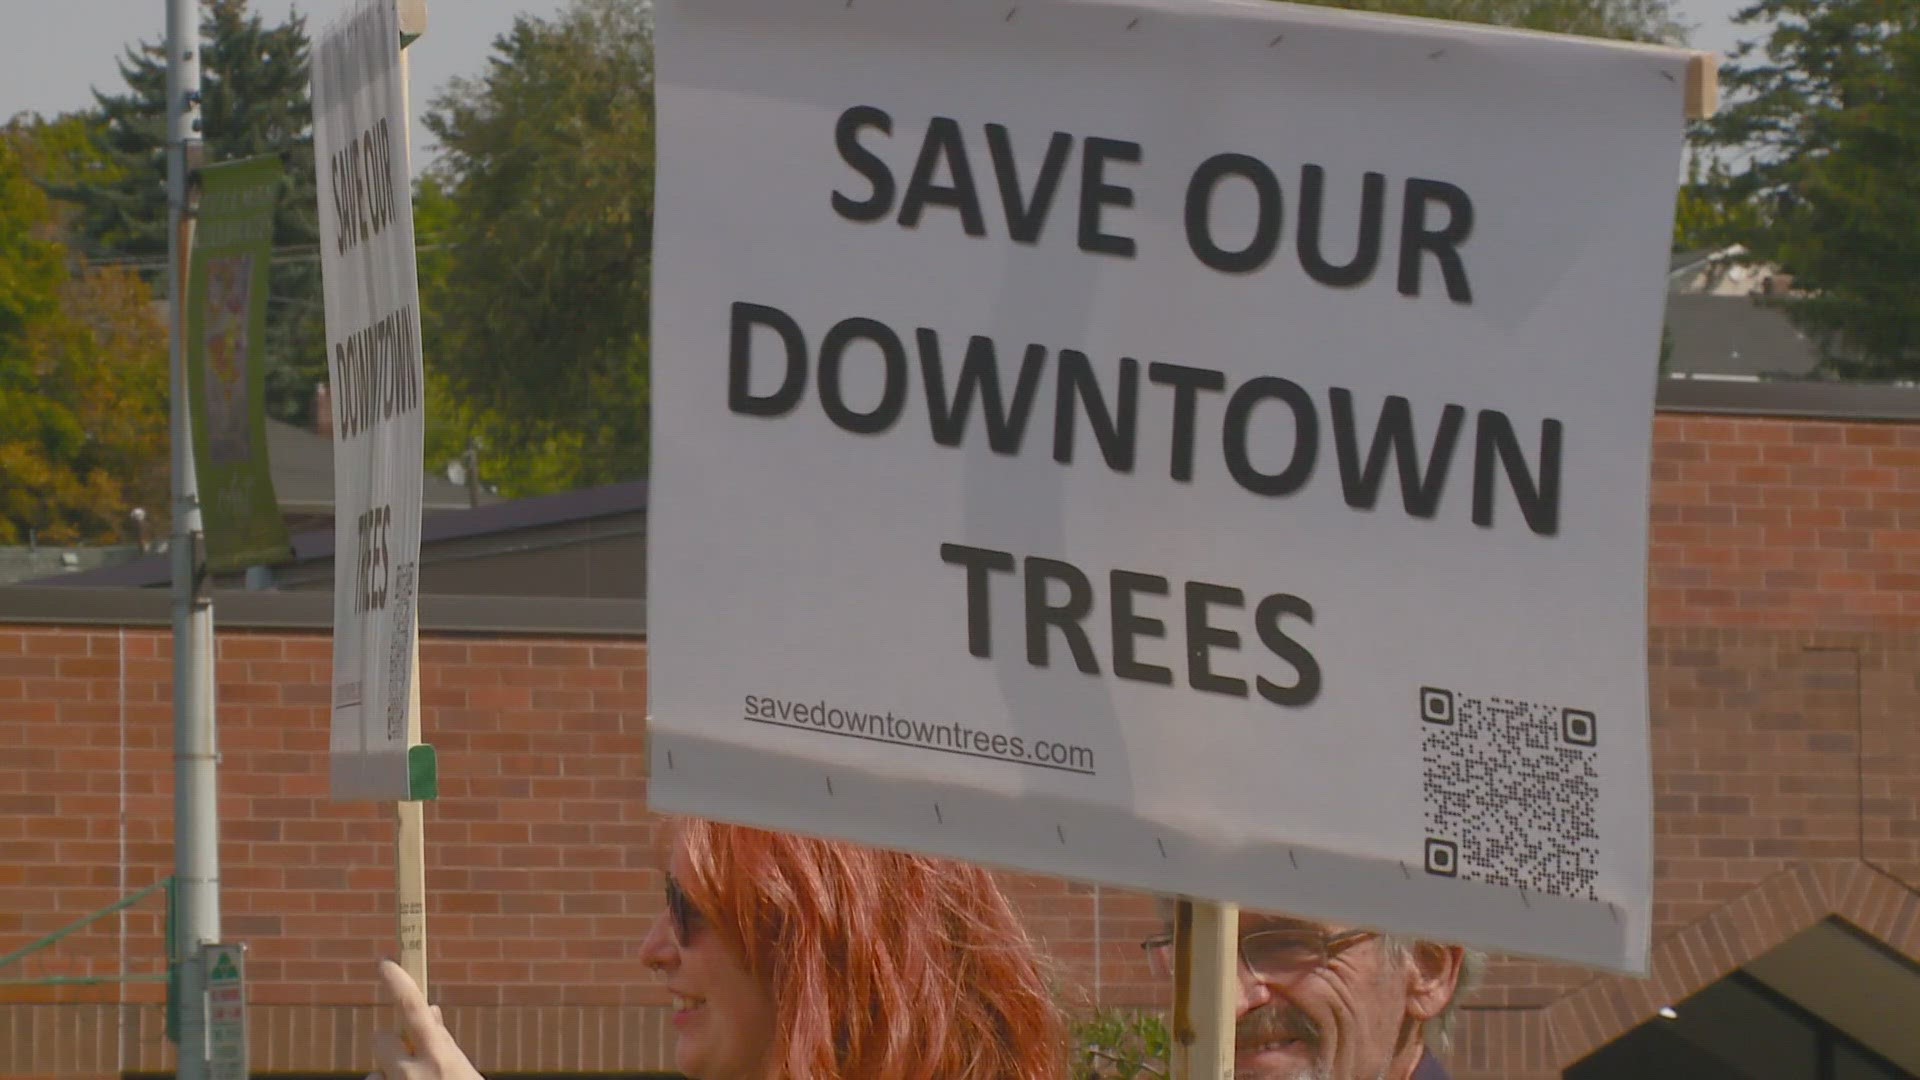 Community members work to drum up support to save Pullman's downtown trees